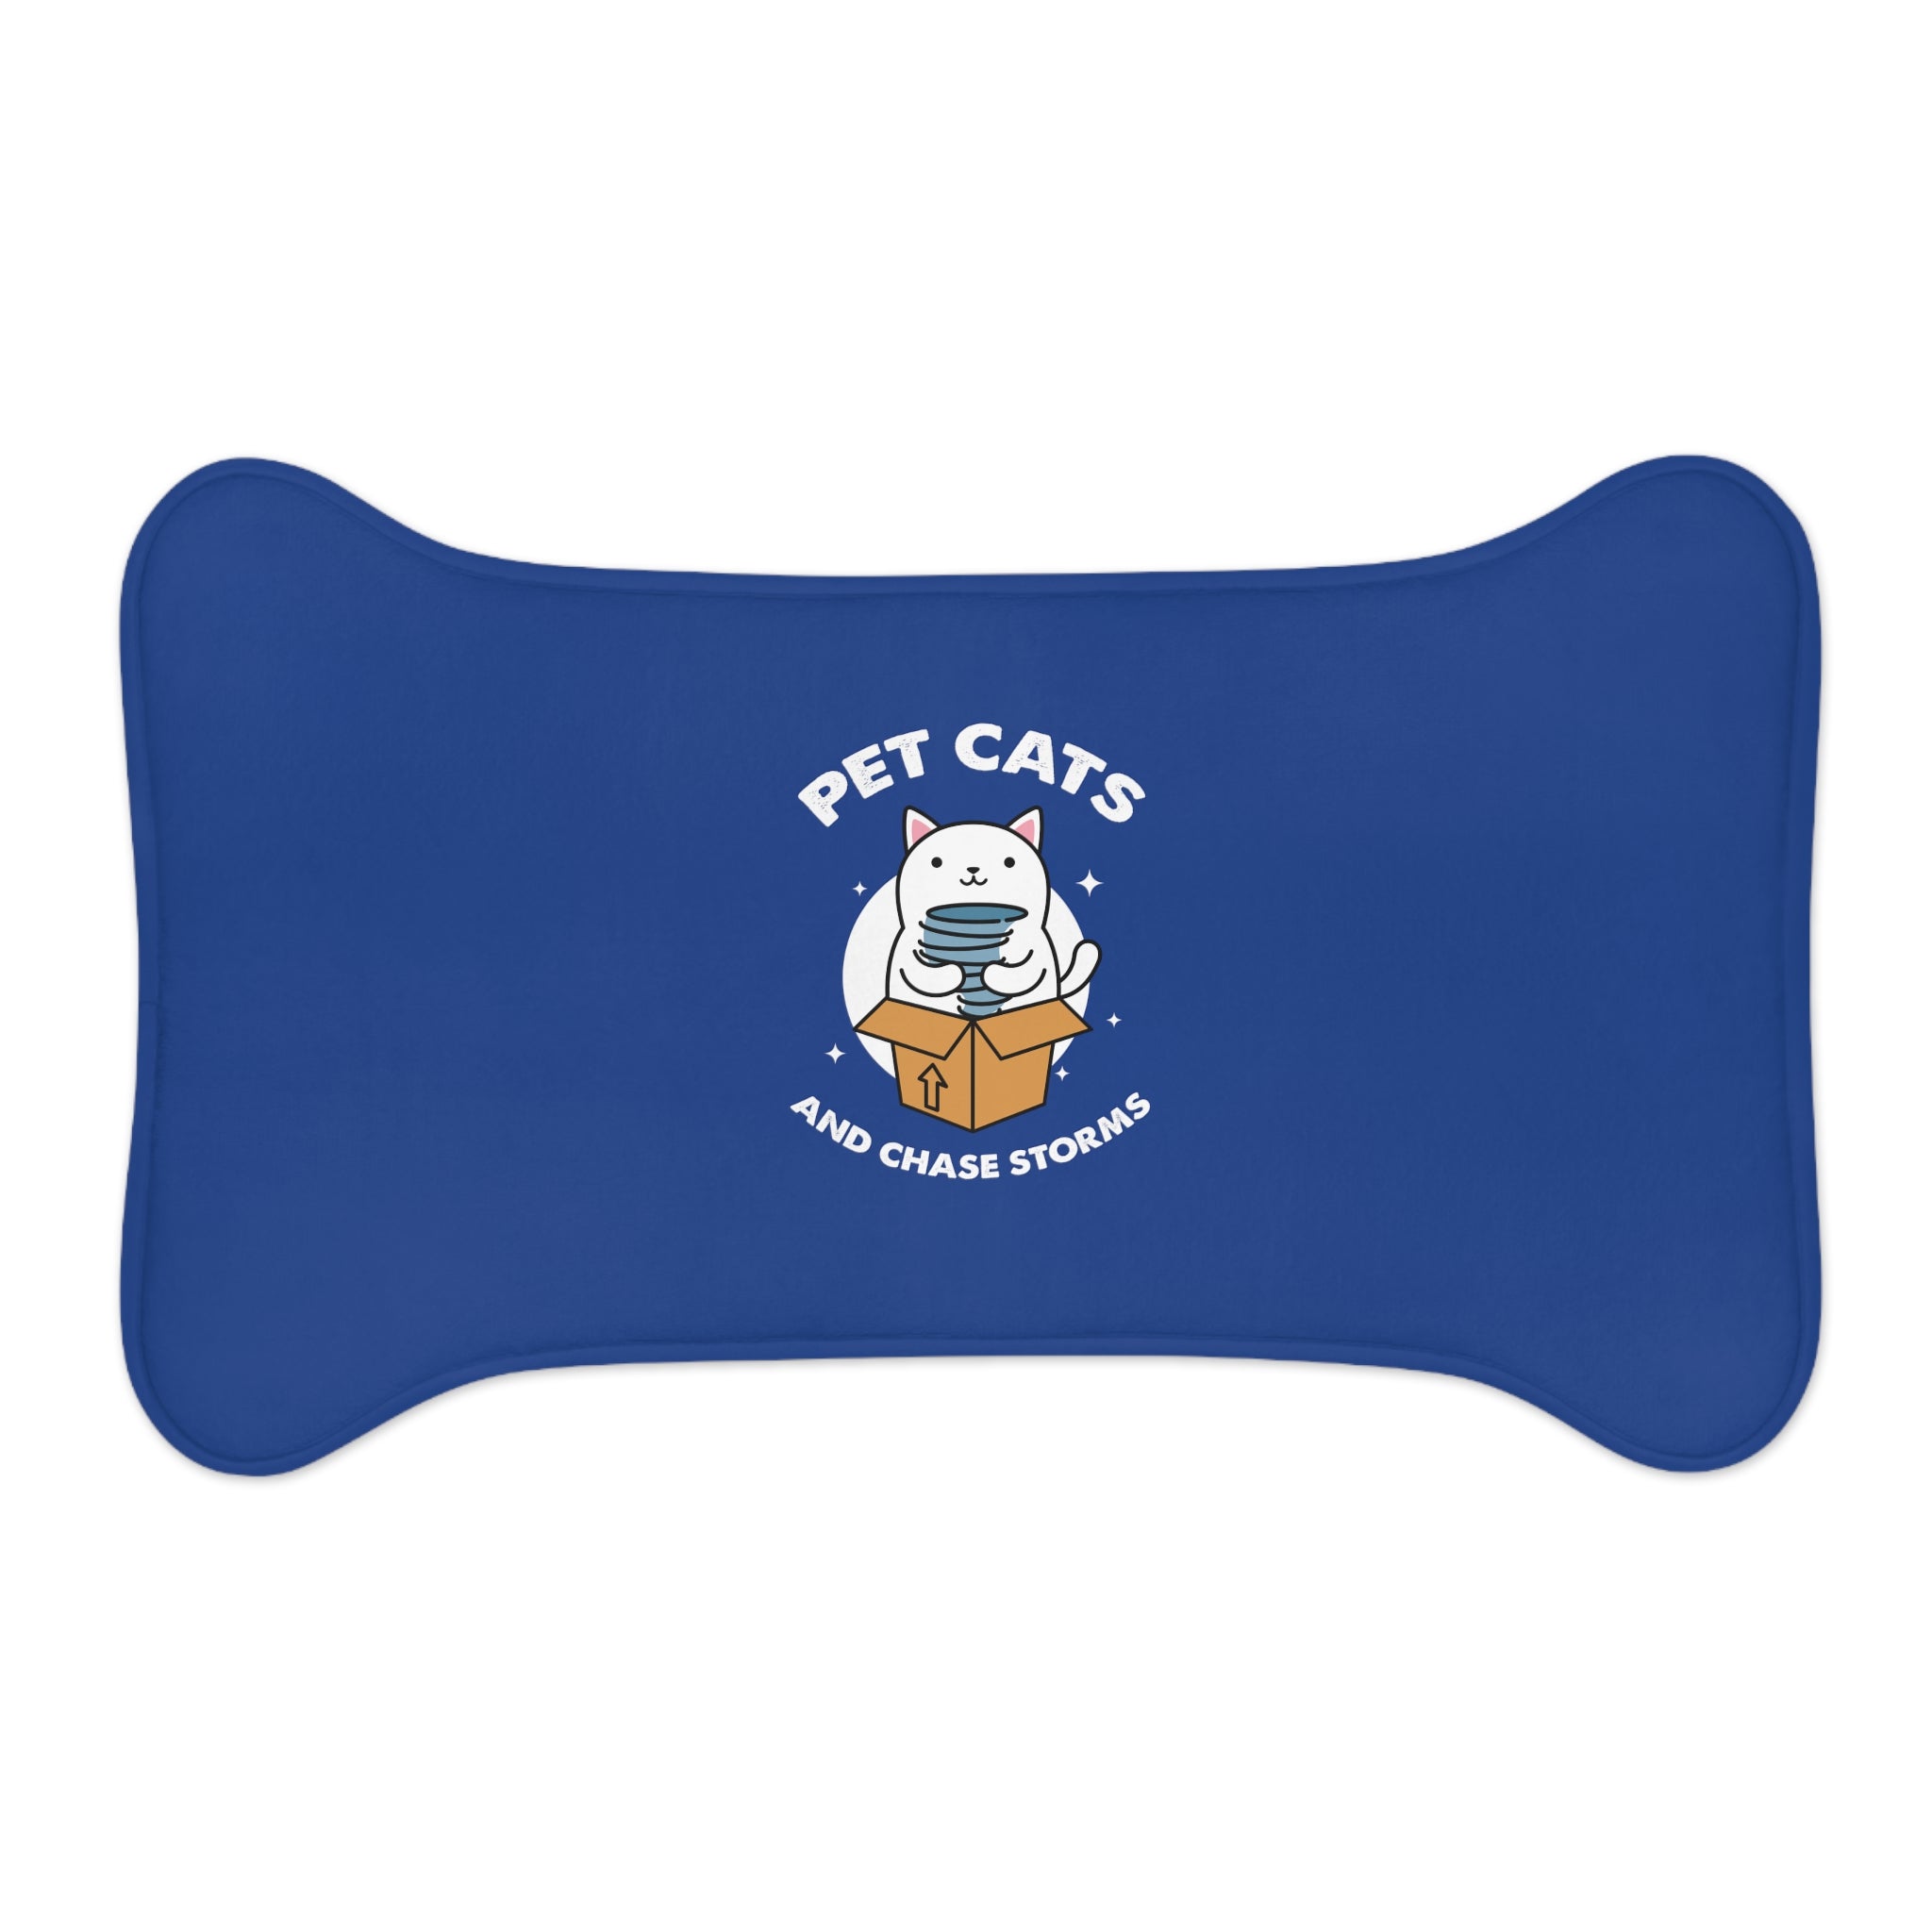 Pet Cats and Chase Storms Pet Feeding Mat 